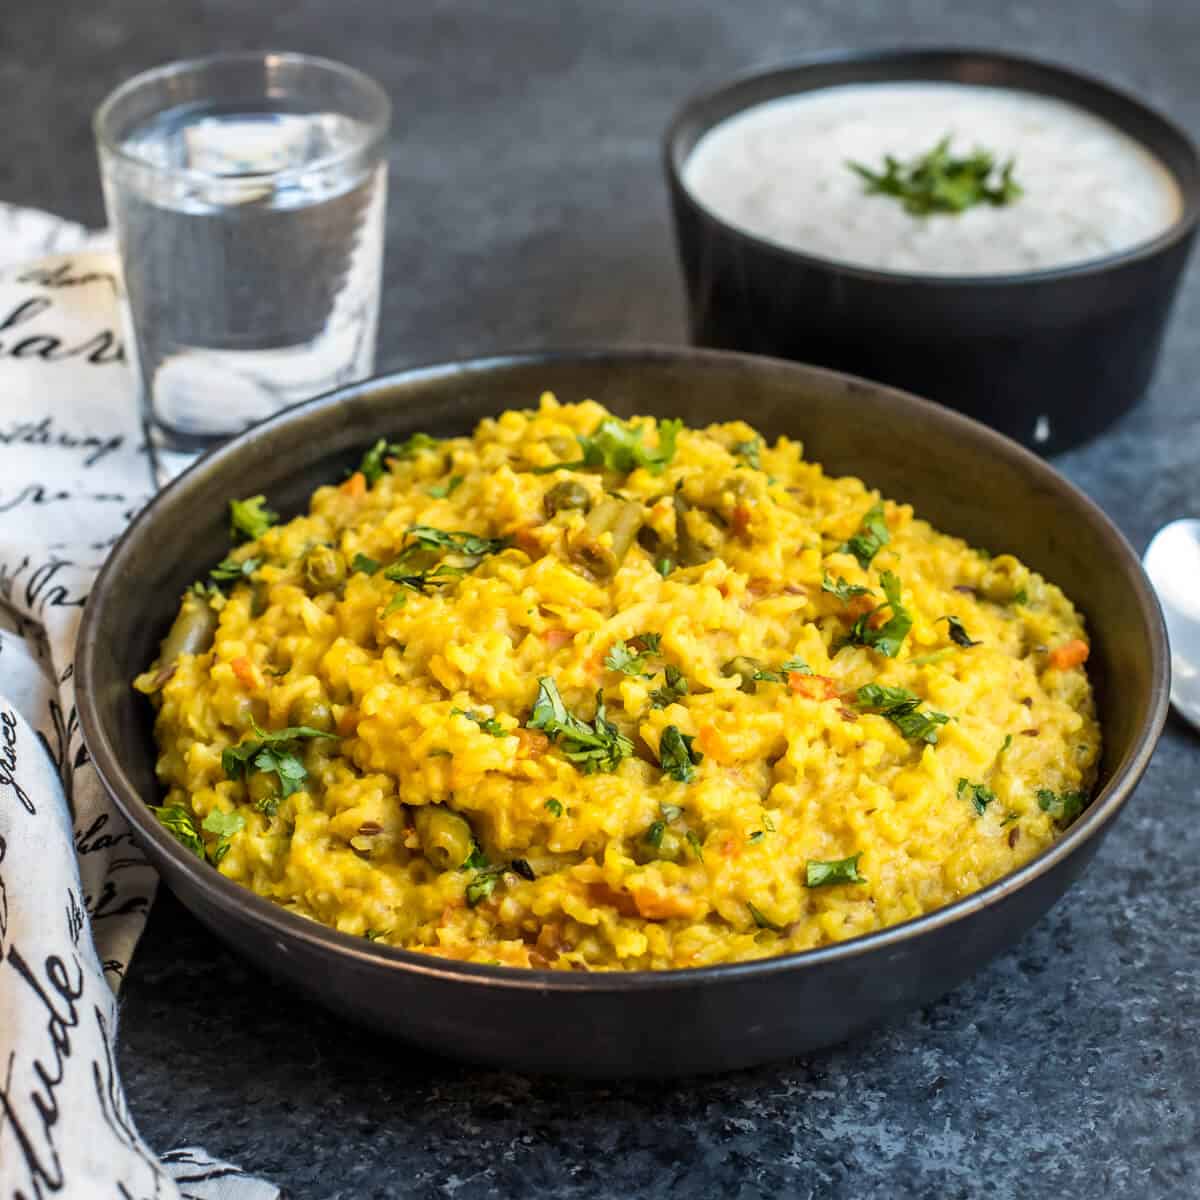 A bowl of Masala khichdi topped with cilantro leaves.